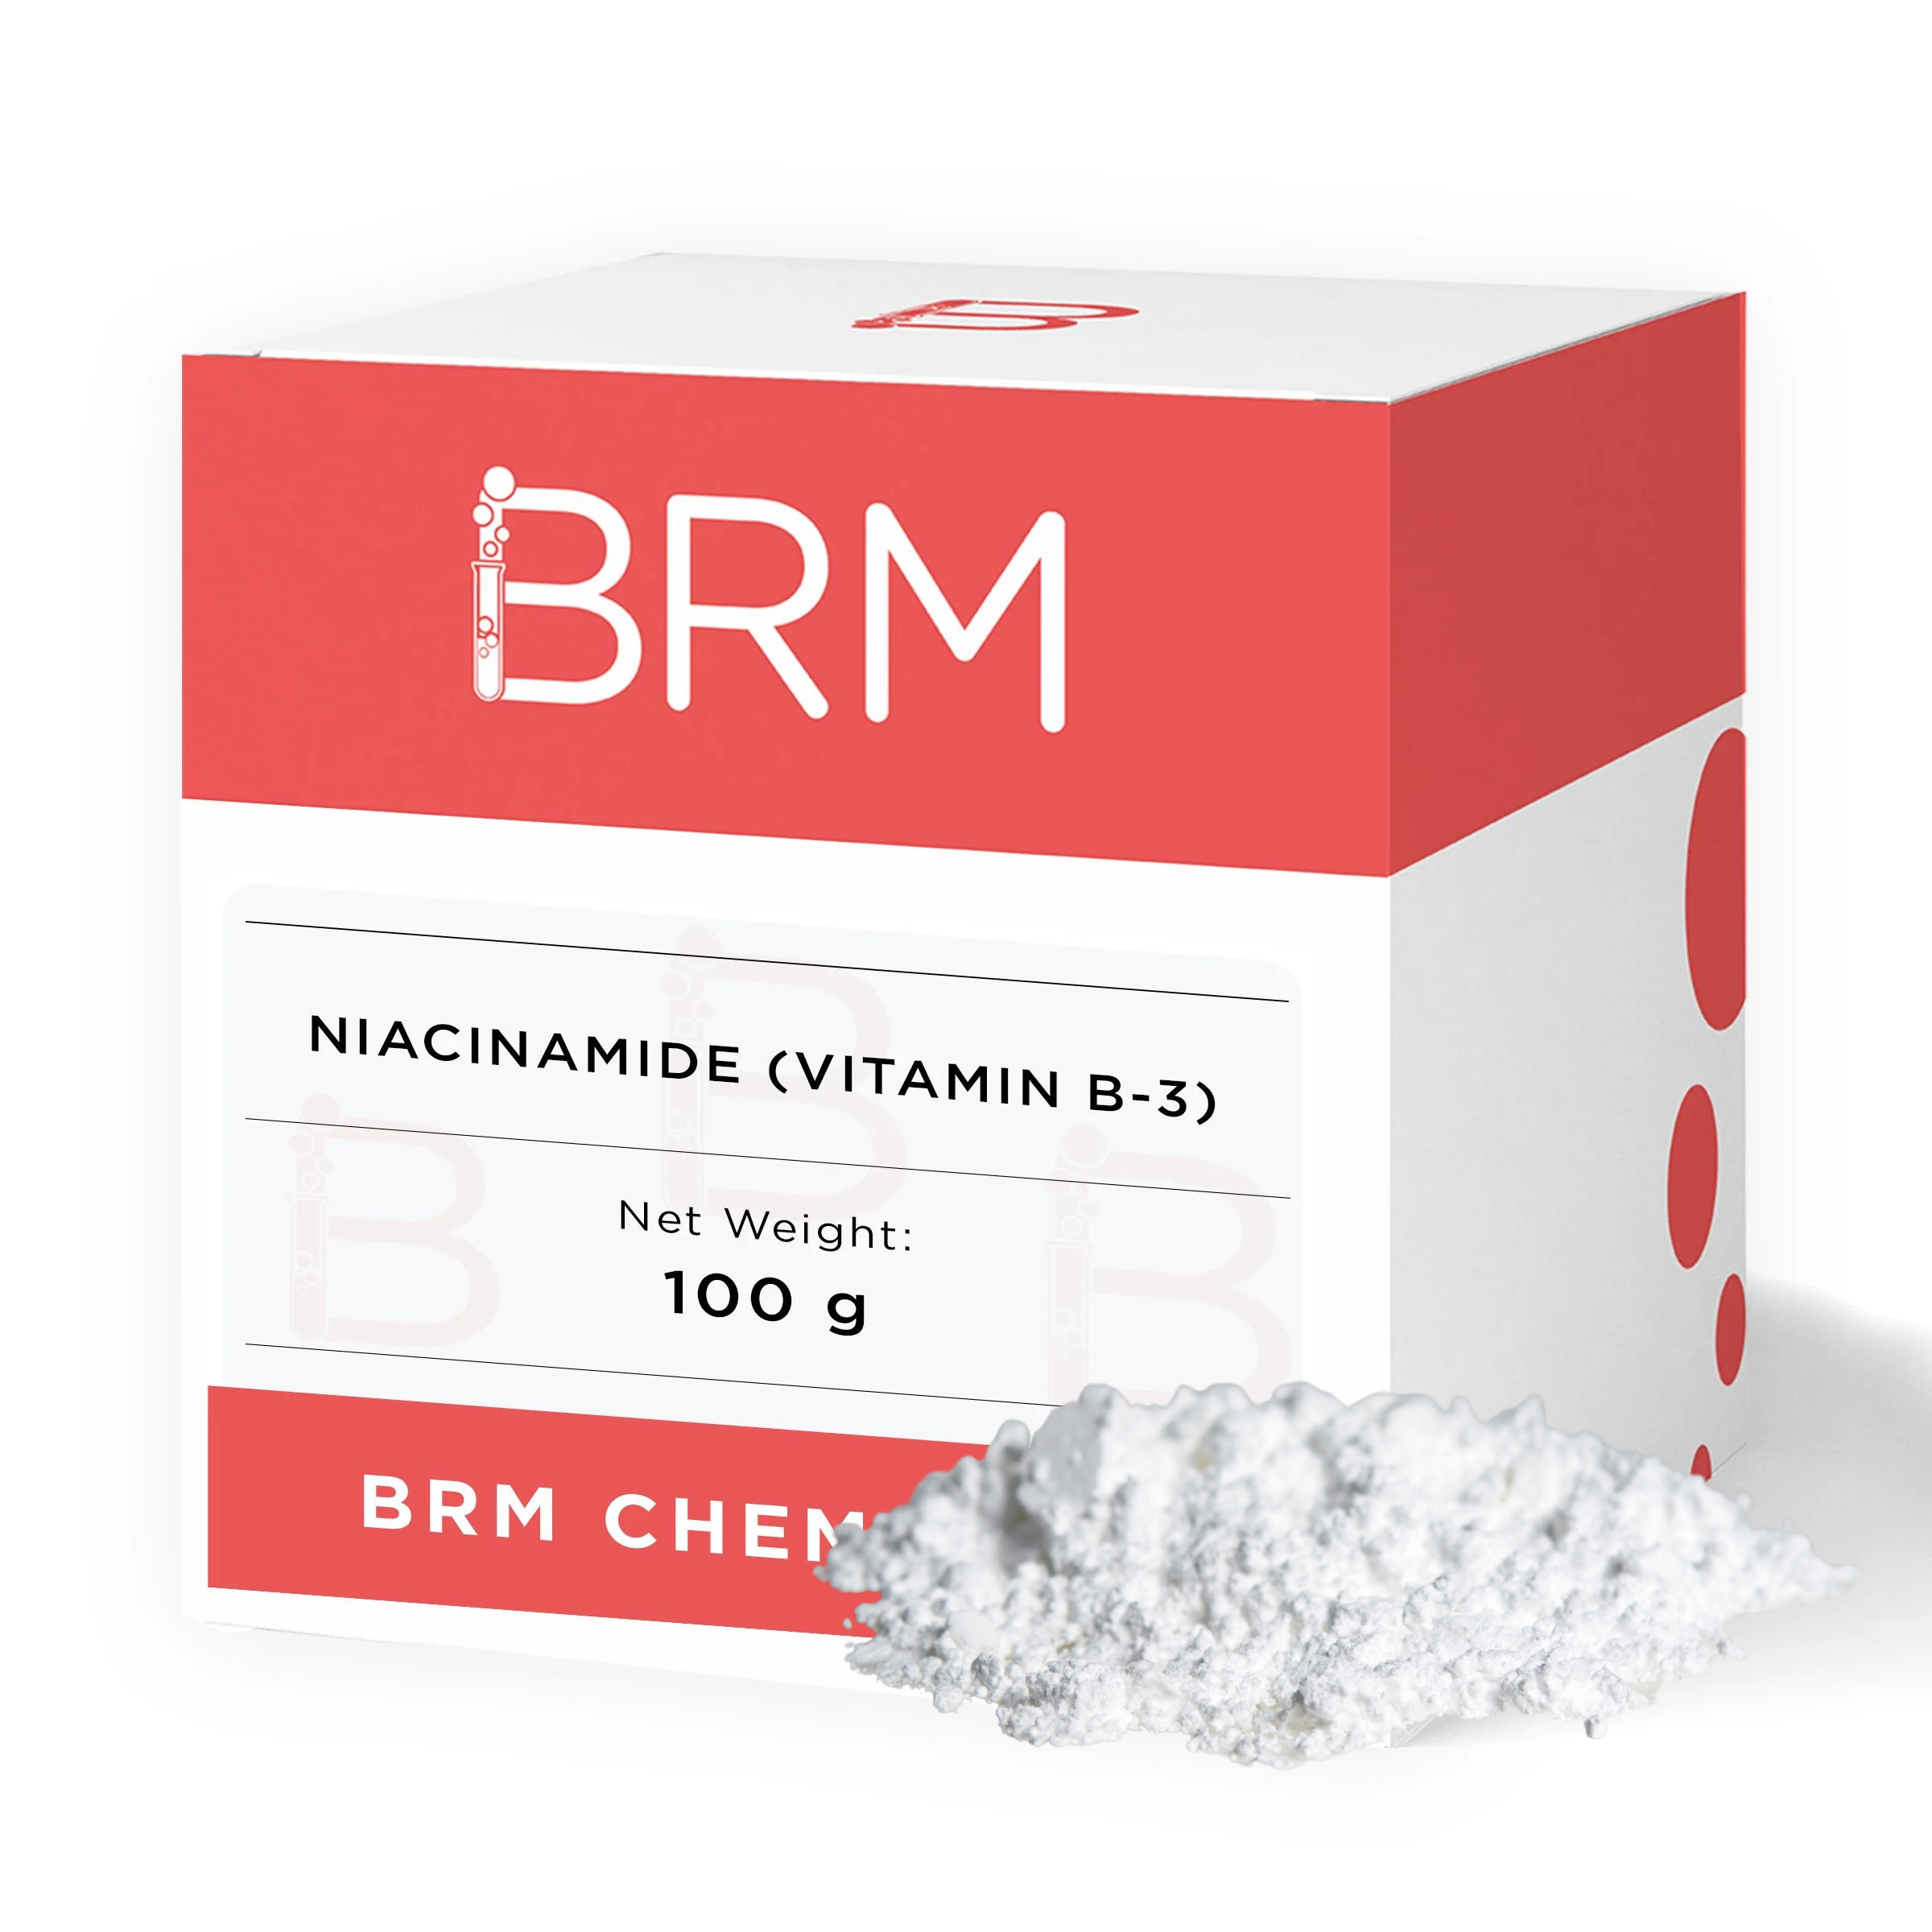 brm-chemicals-niacinamide-vitamin-b3-powder-for-serum-making-anti-ageing-beauty-formulations-moisturizer-lotion-making-cosmetic-making-diy-personal-care-for-face-hair-skin-body